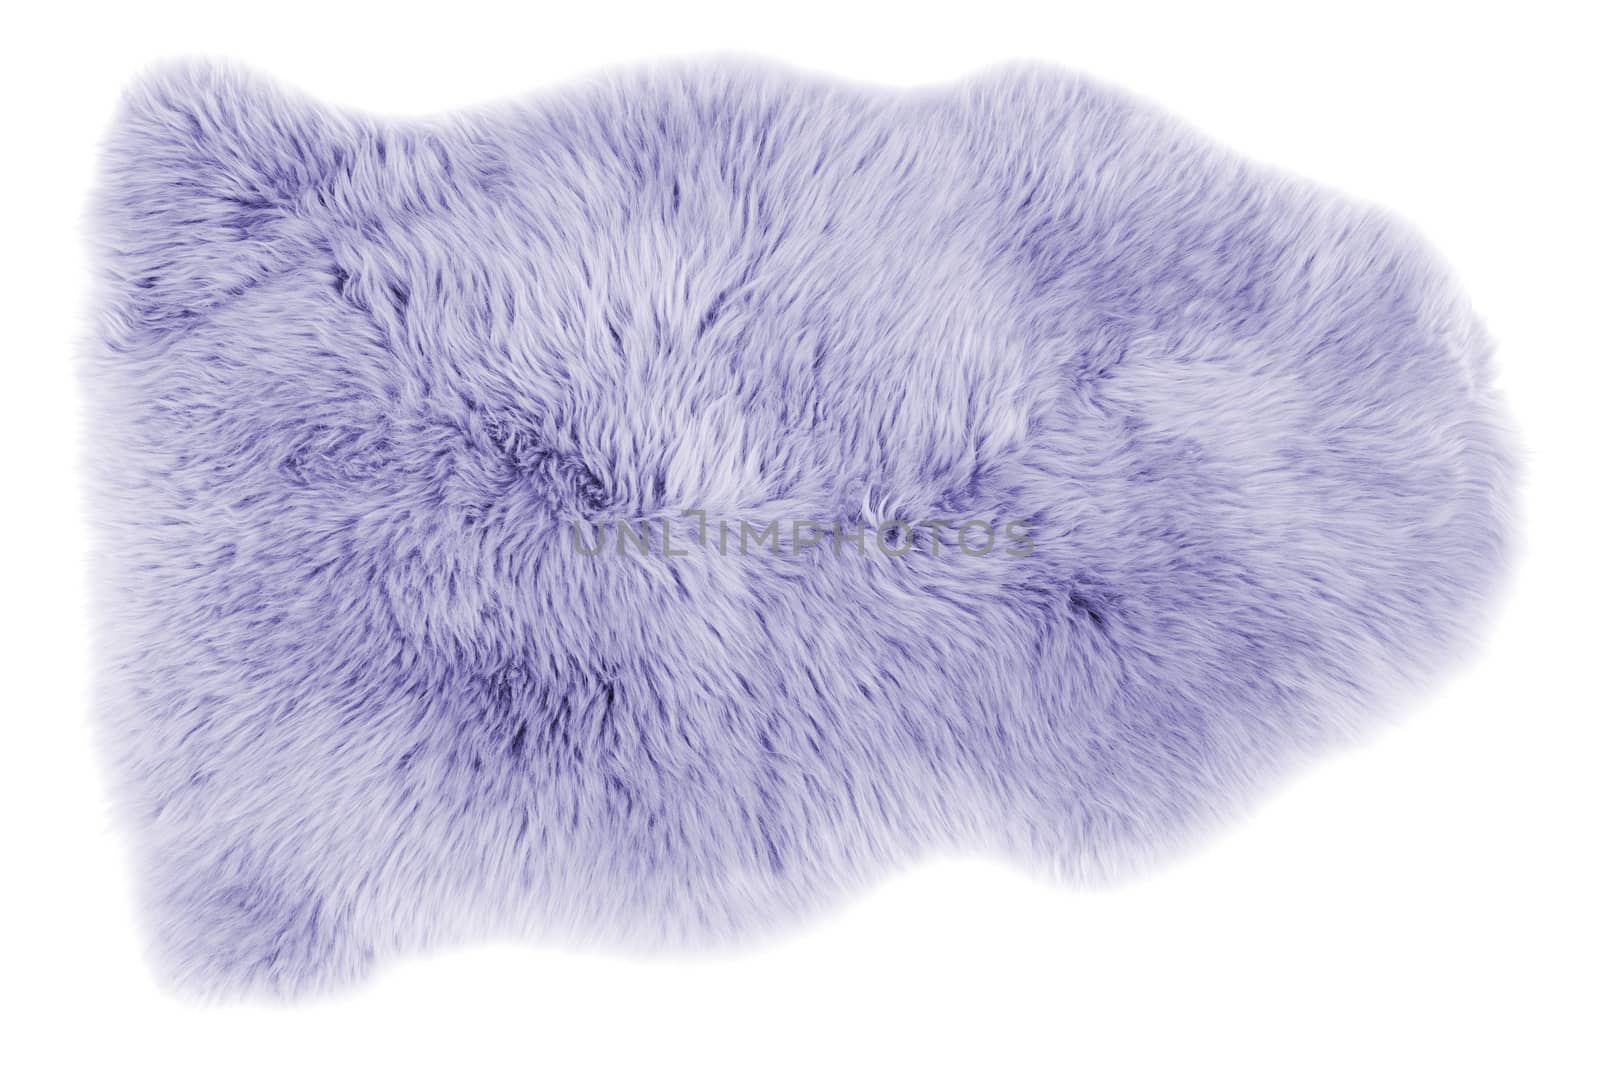 Soft fur carpet isolated on white background